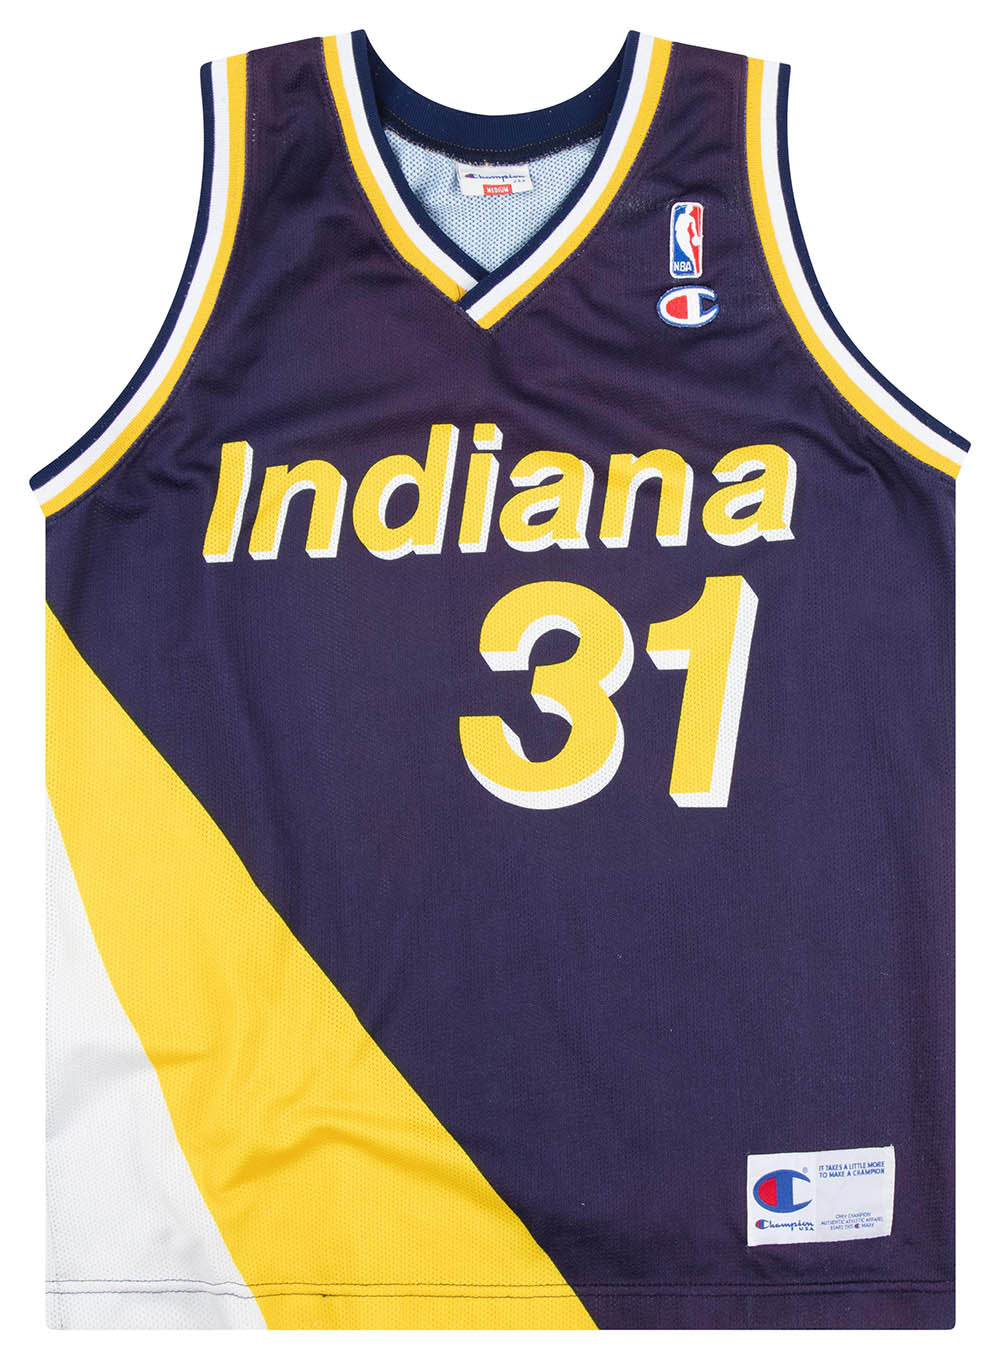 90s pacers jersey